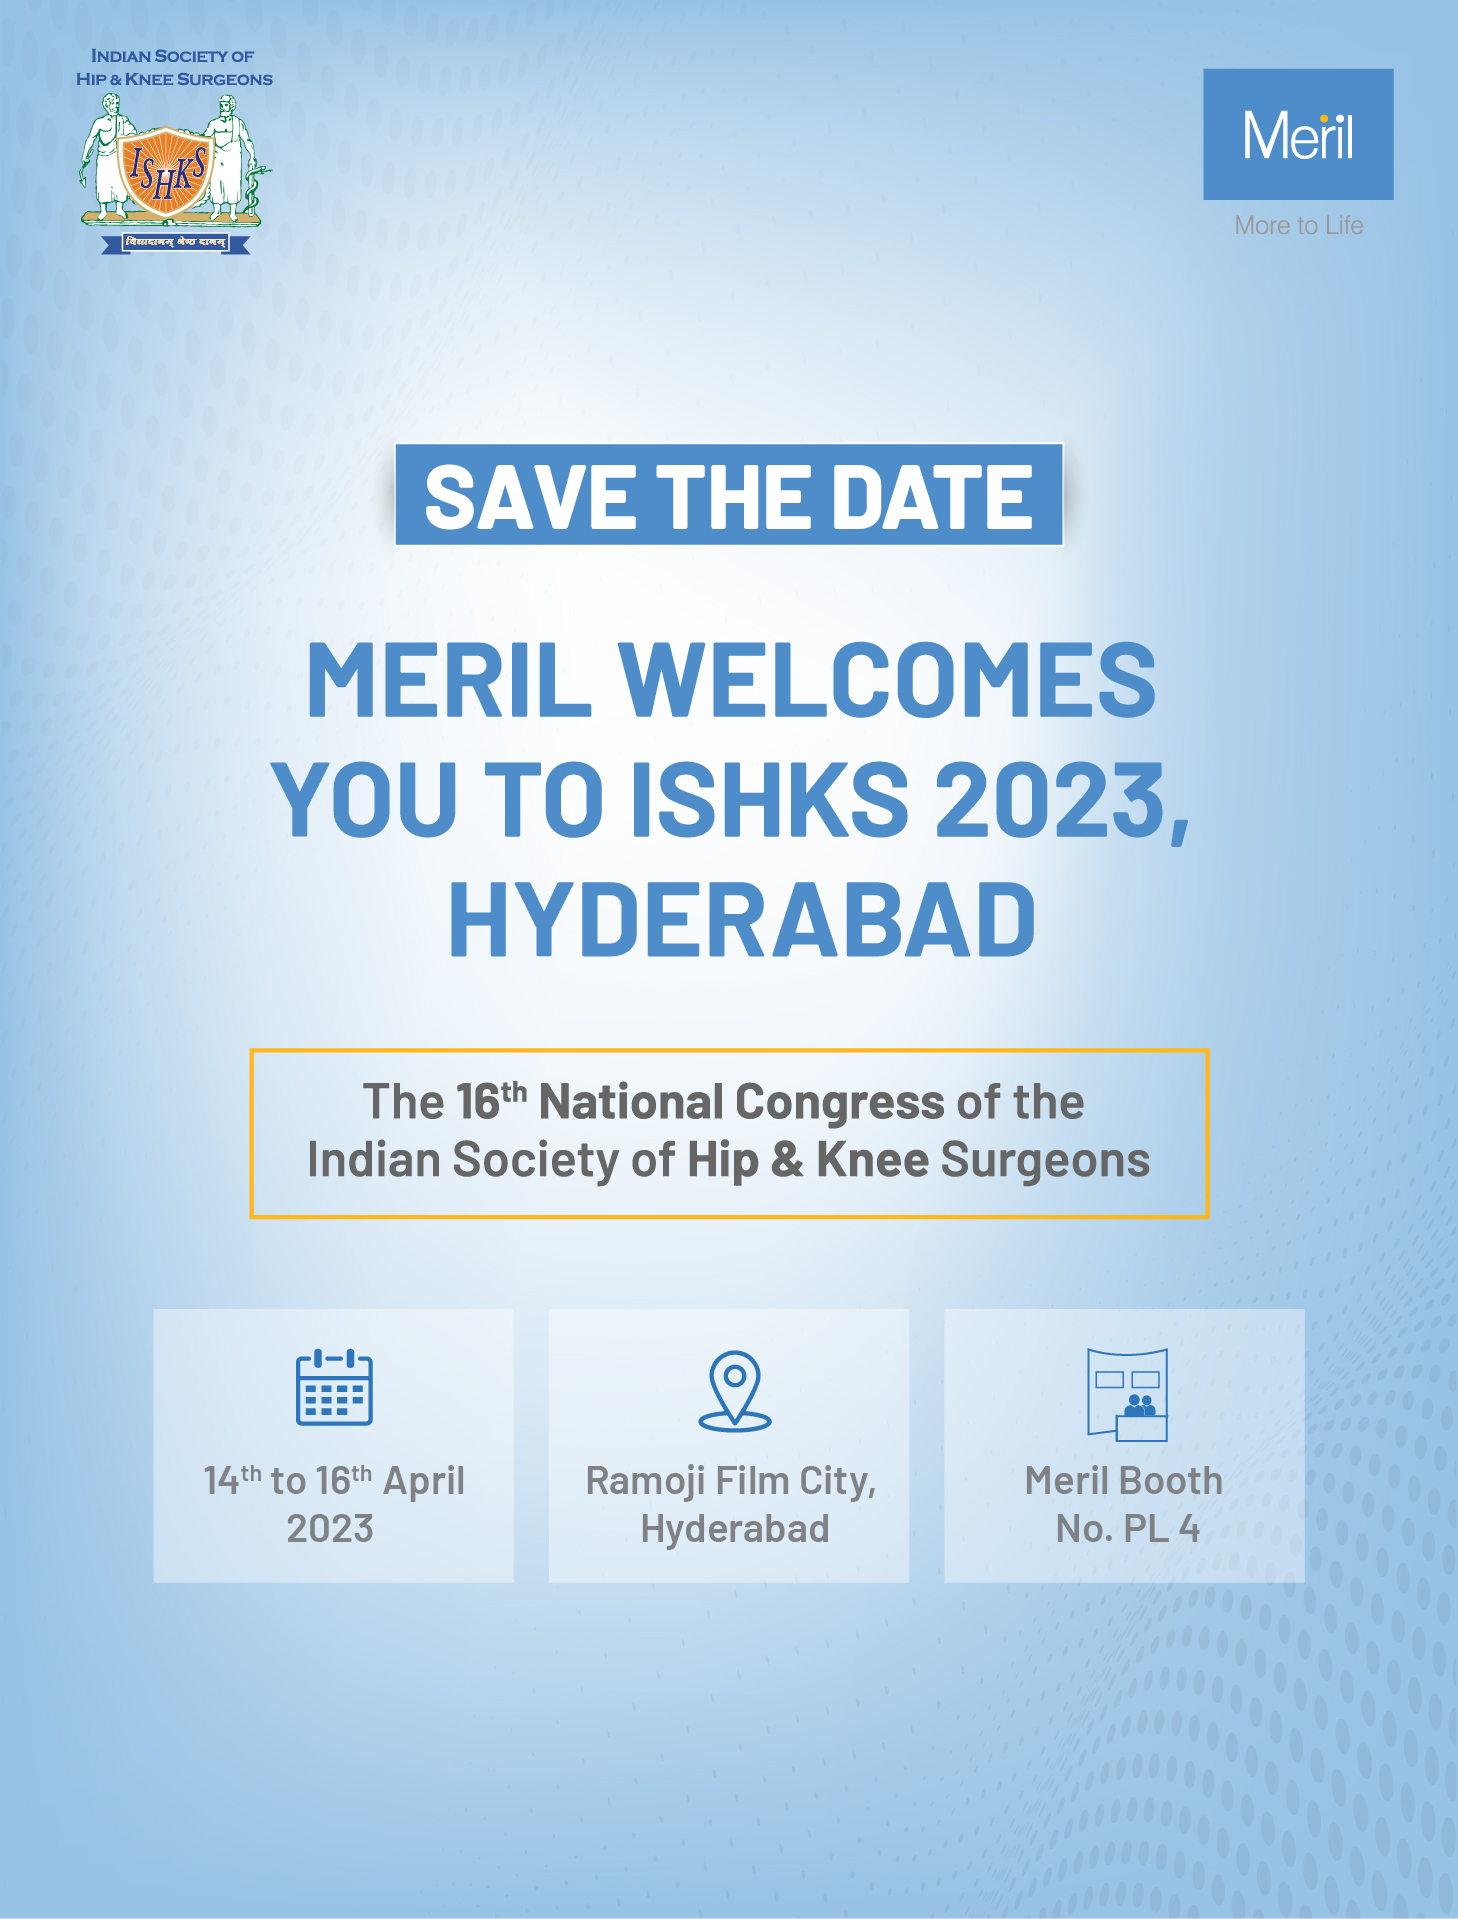 The 16th National Congress of the Indian Society of Hip & Knee Surgeons (ISHKS 2023)! Save the Date!